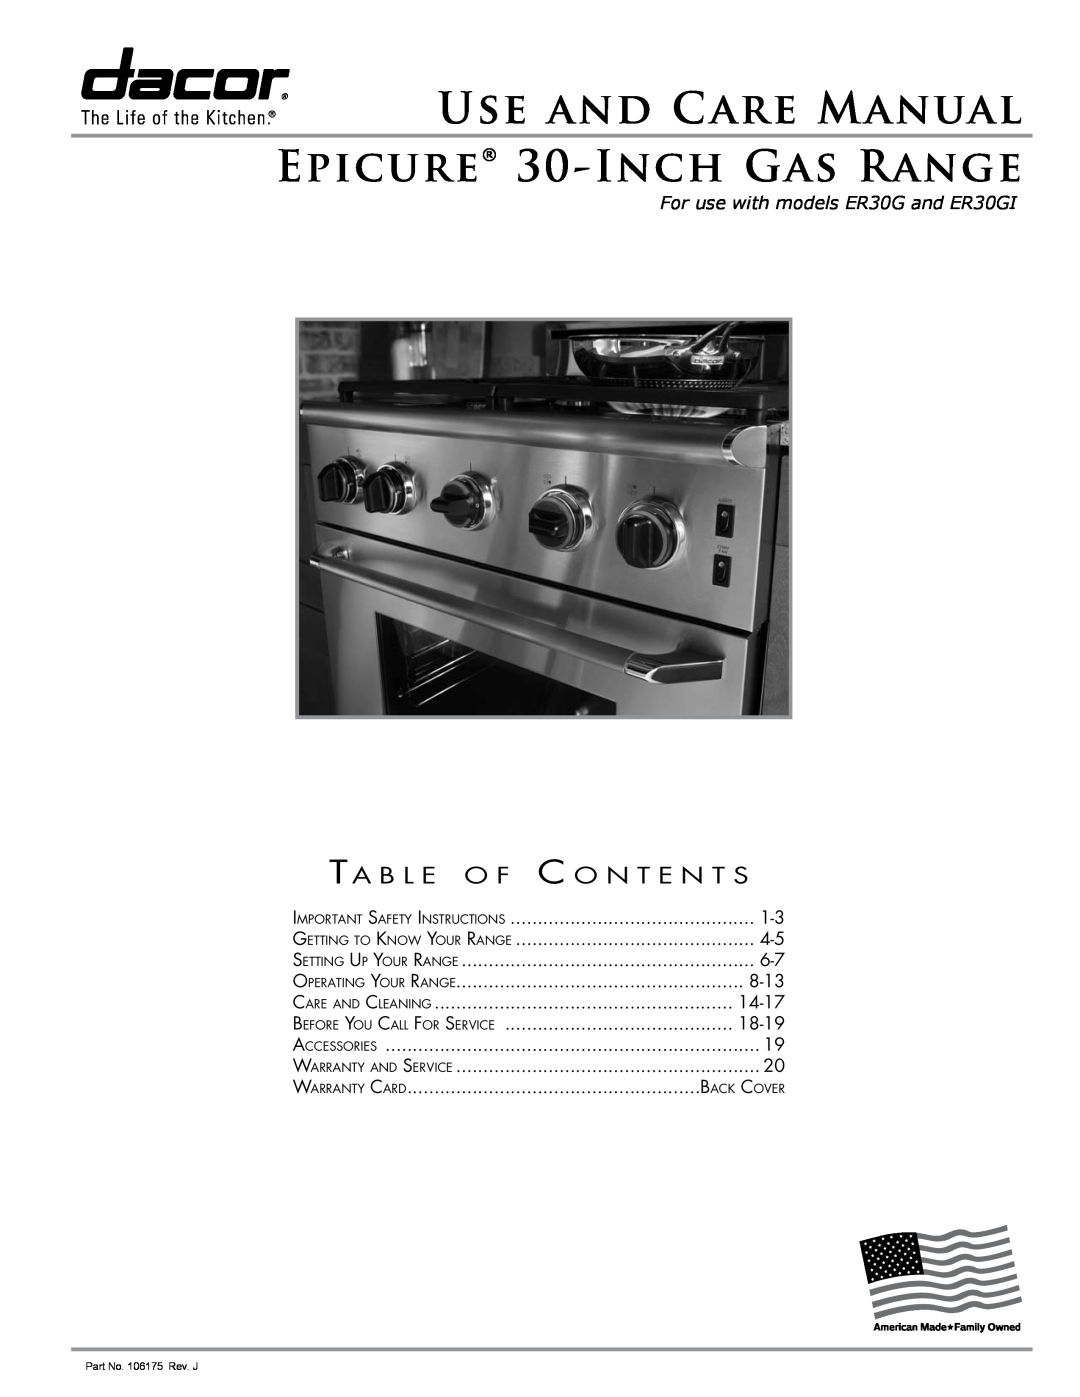 Sears manual For use with models ER30G and ER30GI, USE AND CARE MANUAL EPICURE 30-INCH GAS RANGE, A ccessories 